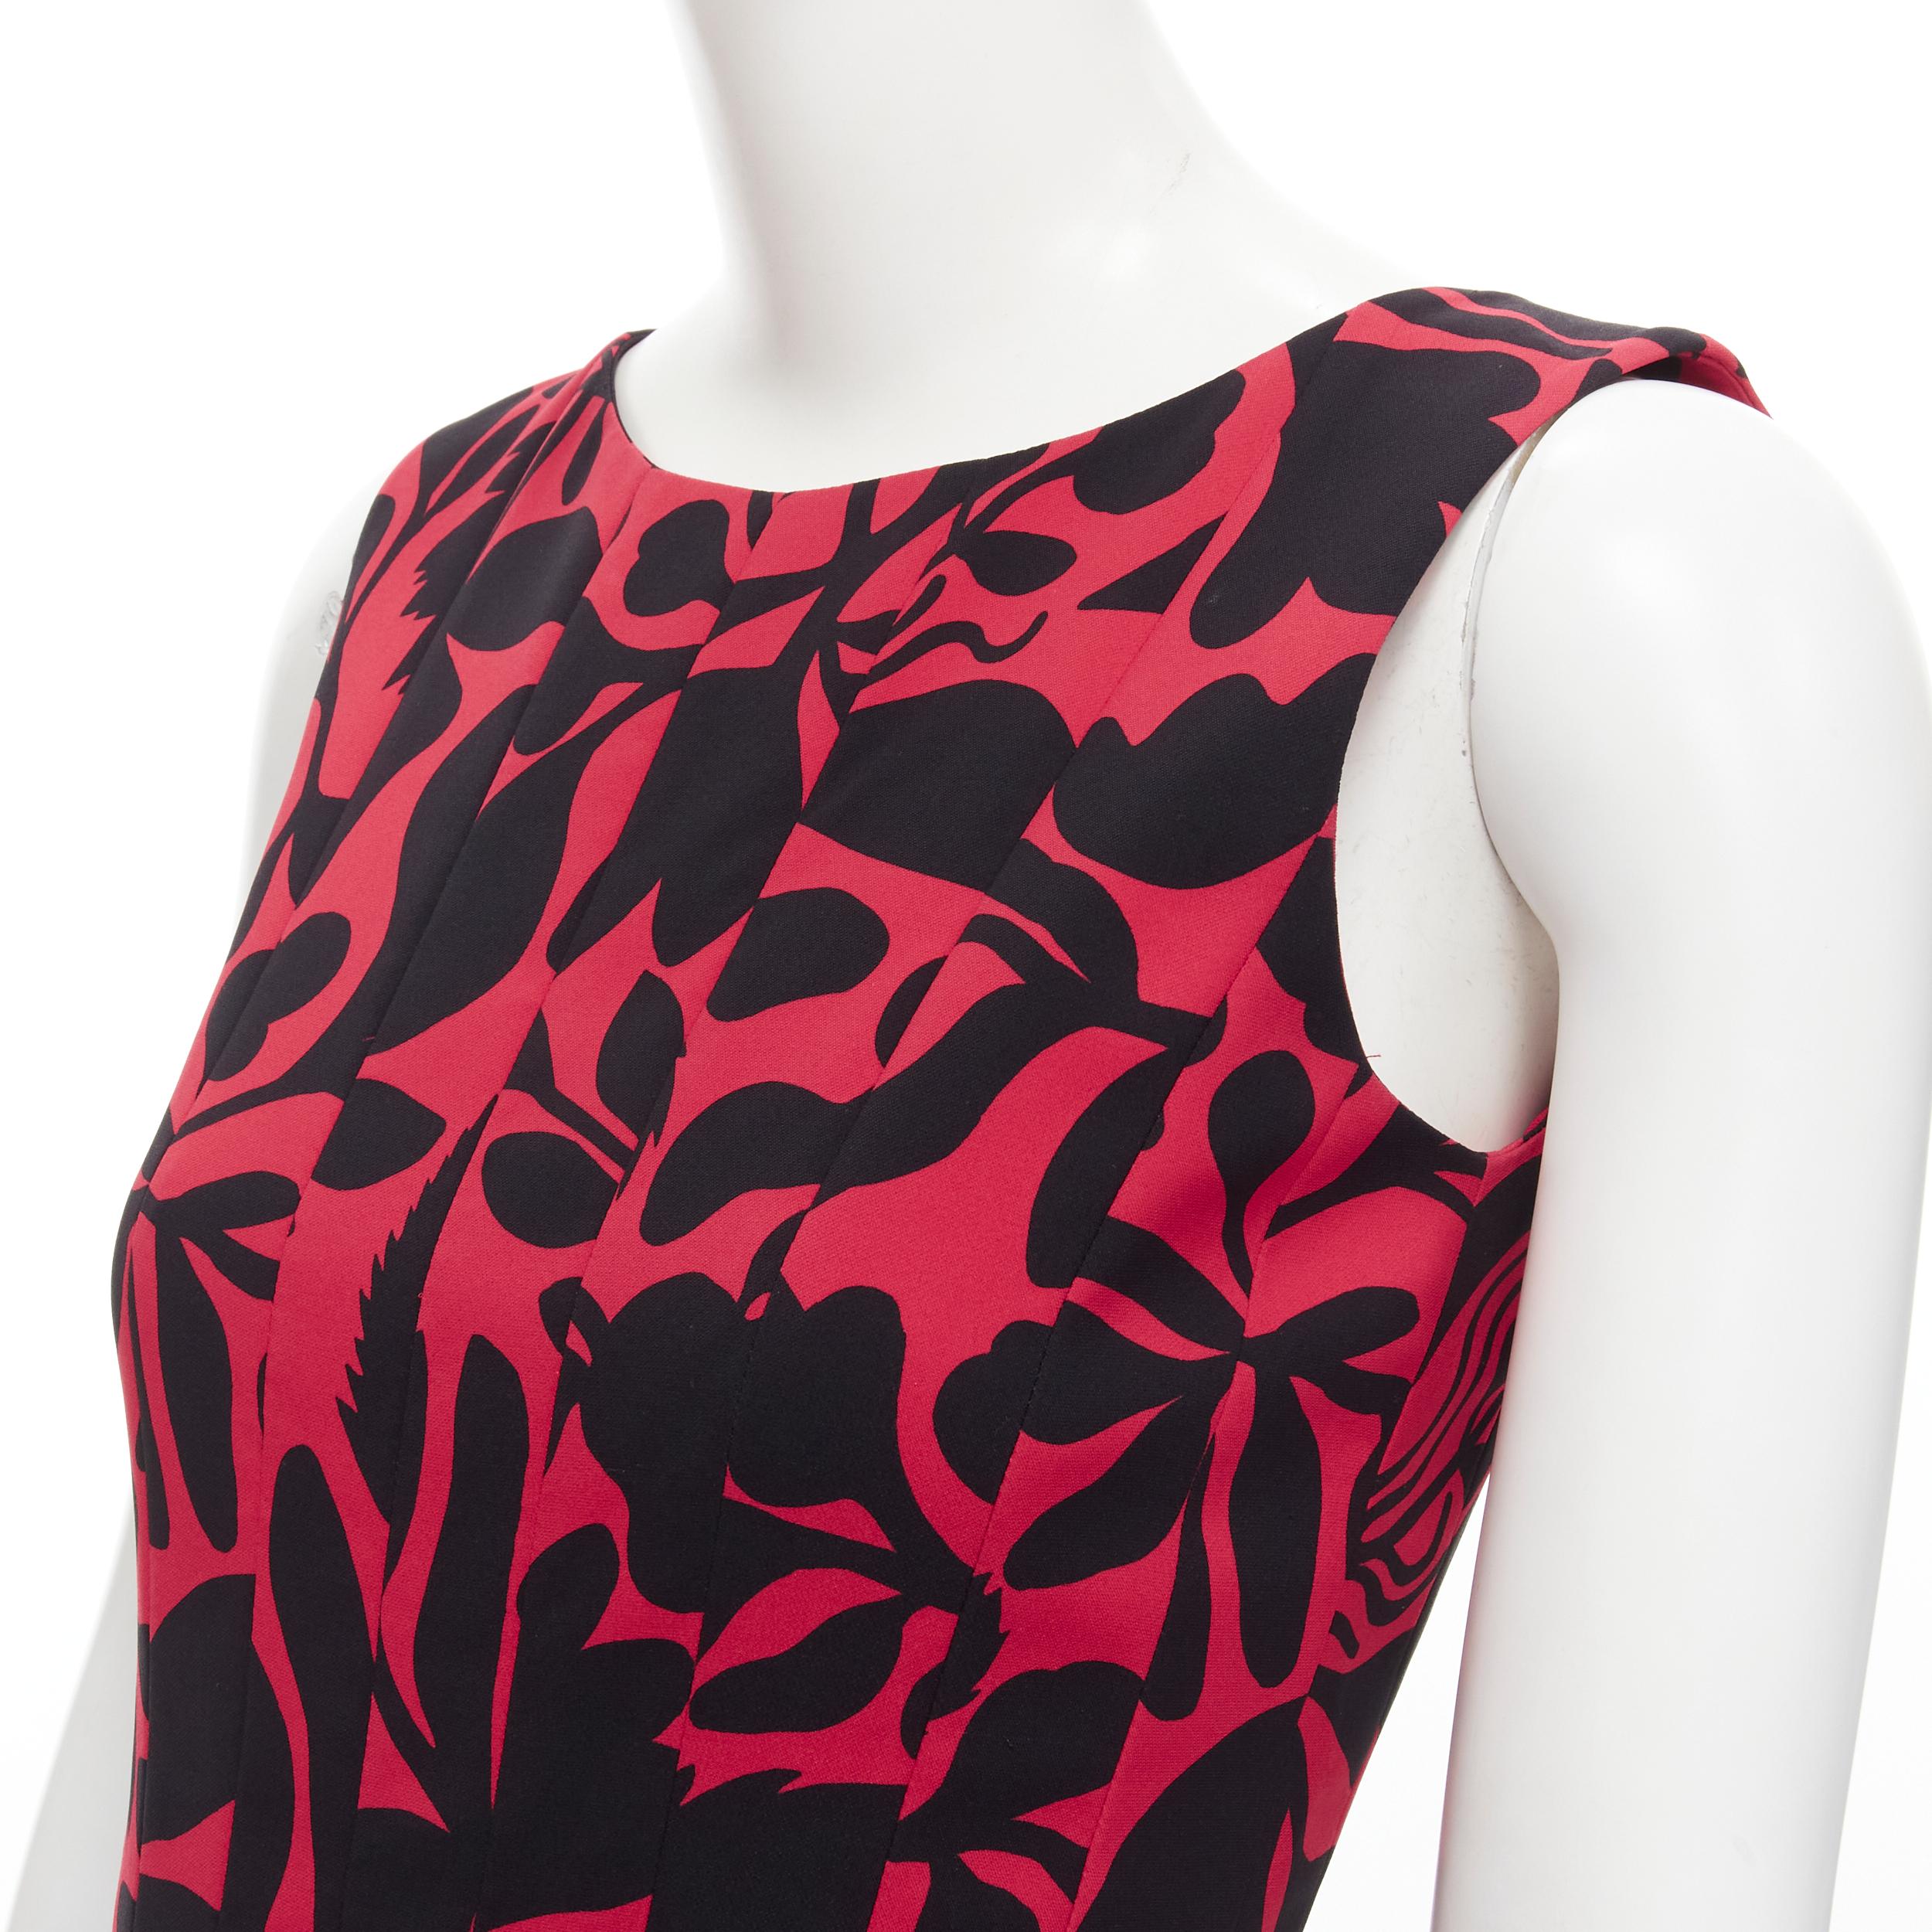 OSCAR DE LA RENTA red black floral print panelled fit flared dress XS 
Reference: LNKO/A01881 
Brand: Oscar De La Renta 
Color: Red 
Pattern: Floral 
Closure: Zip 

CONDITION: 
Condition: Excellent, this item was pre-owned and is in excellent